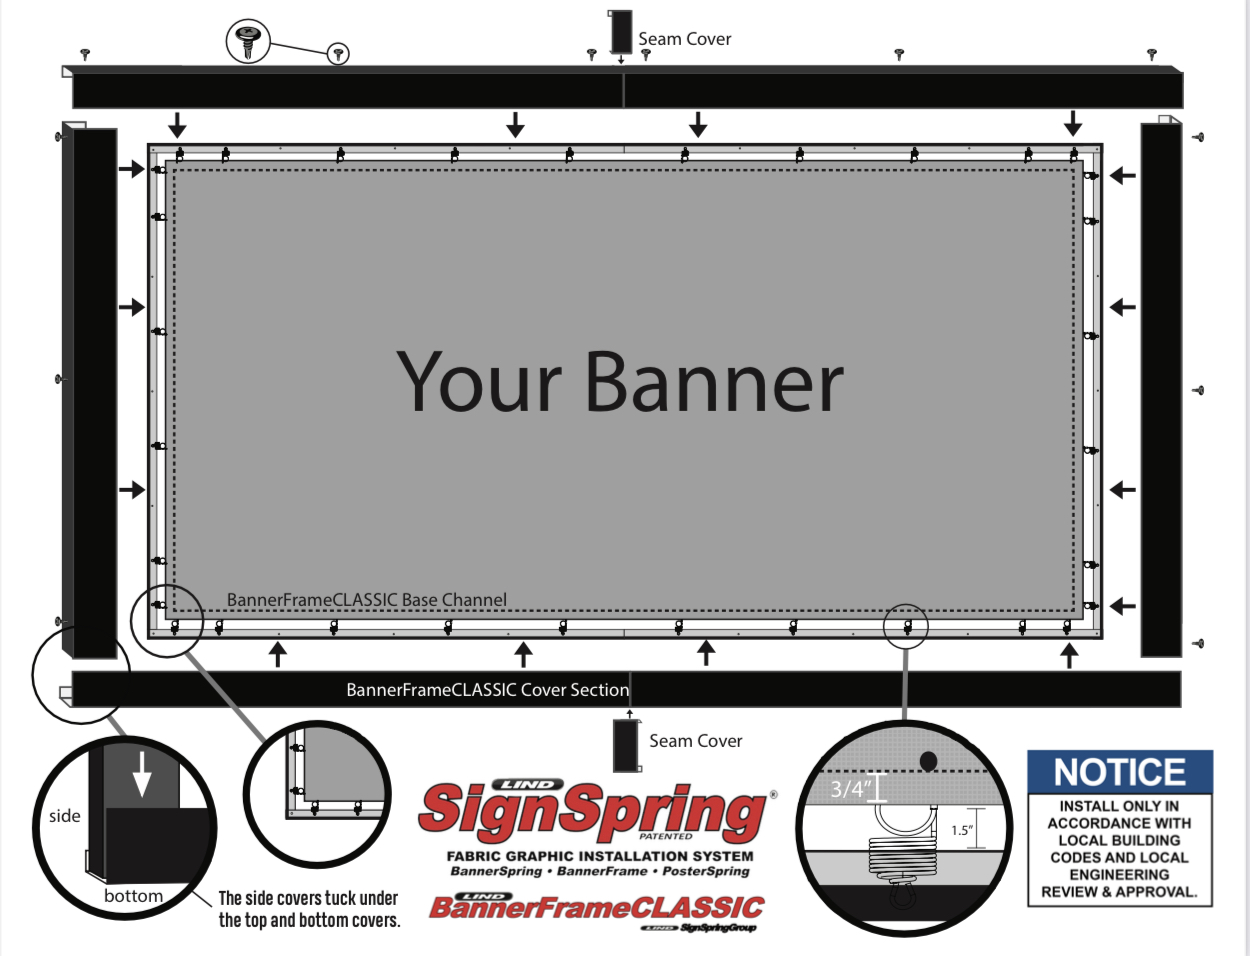 signspring_bannerframe_fabric_Graphic_Installation_System_design Sign Guy Finds Inspiration In a Sam's Club